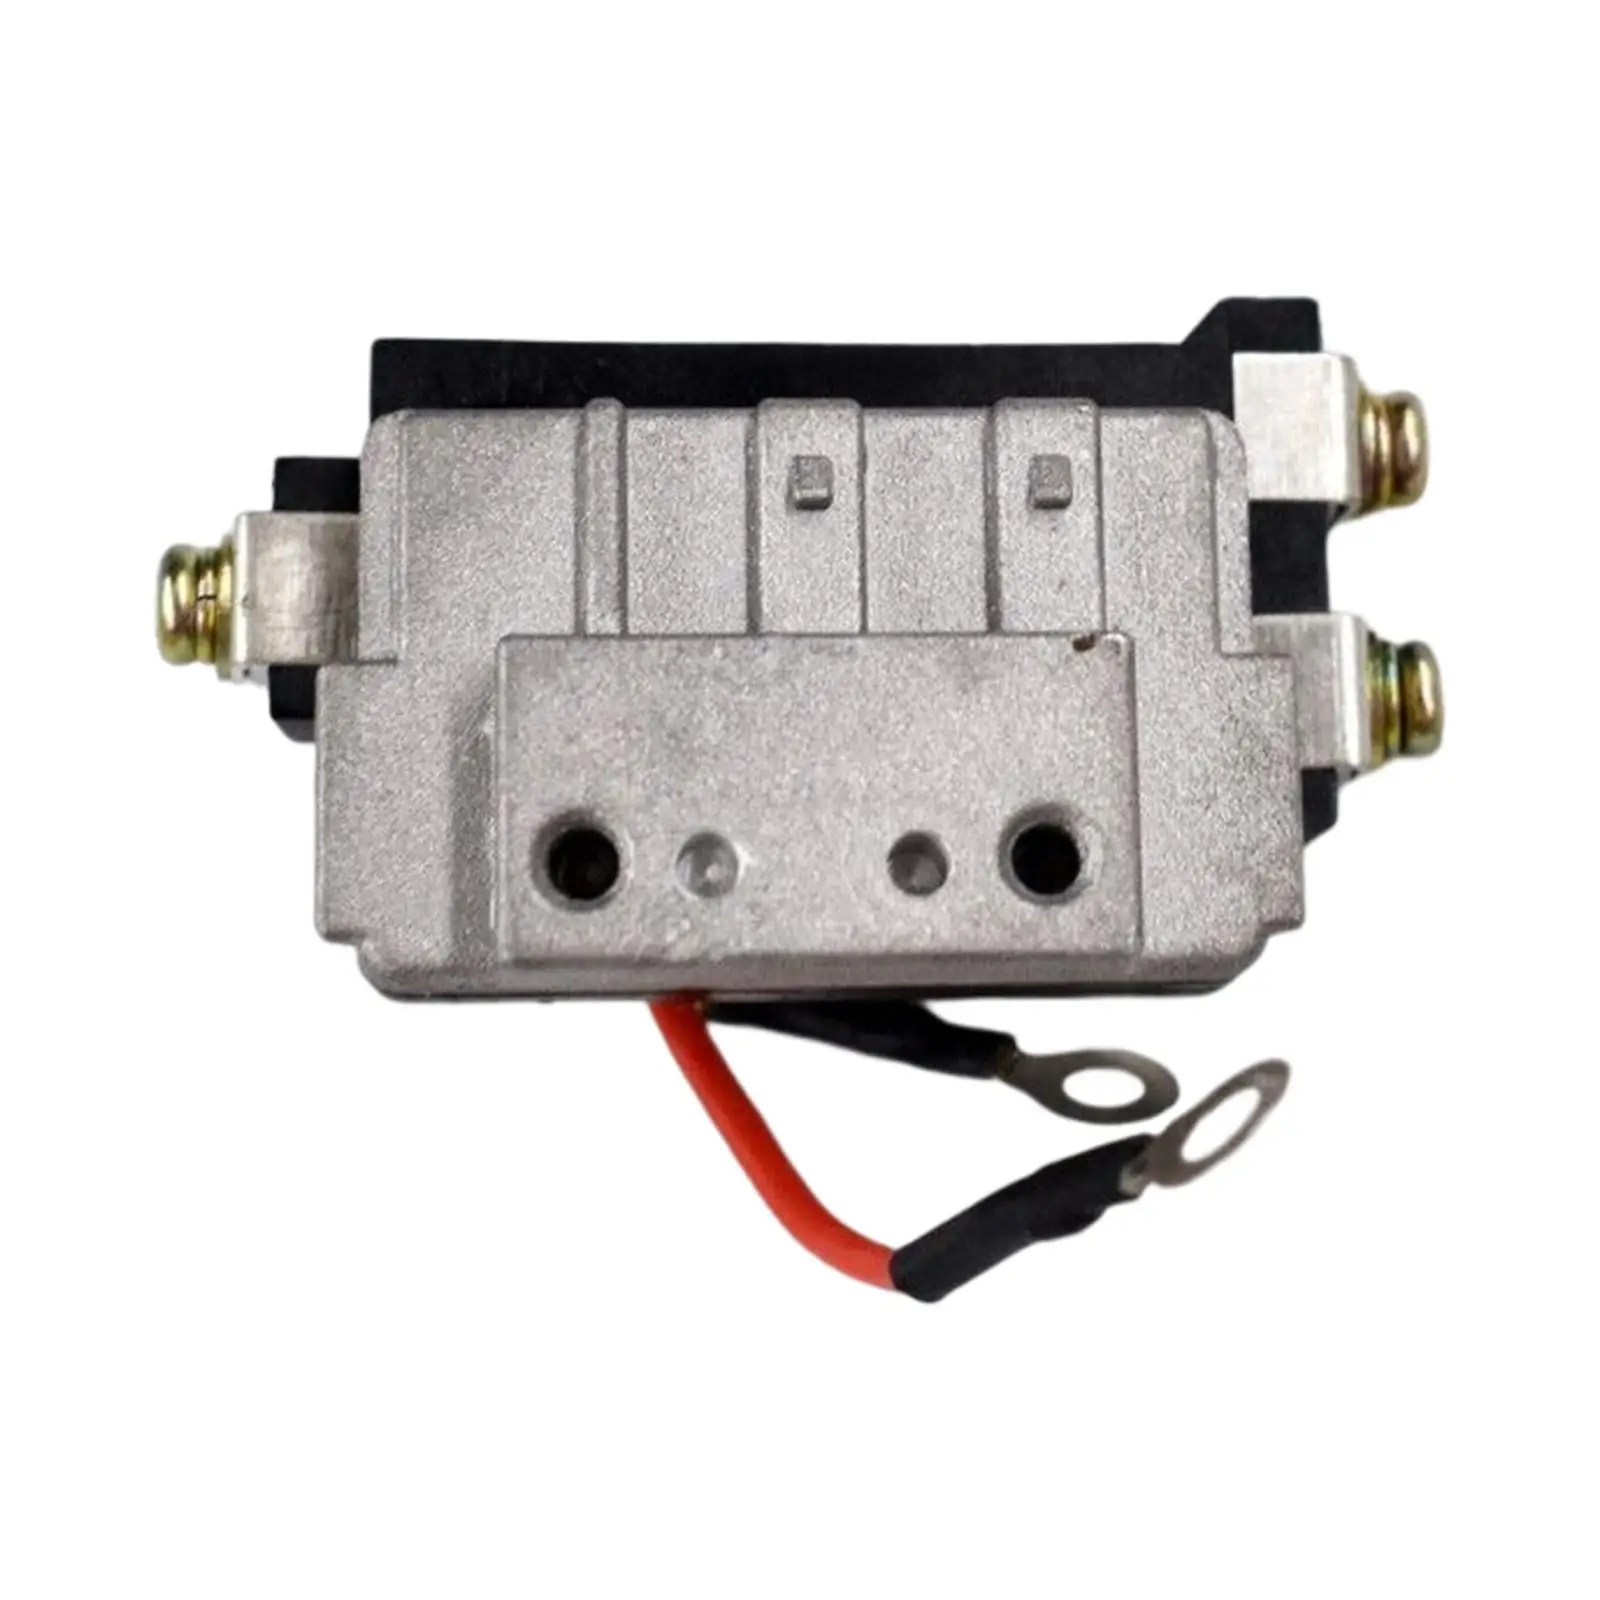 Ignition Module Accessory Replaces Professional Auto Motor Durable Easy to